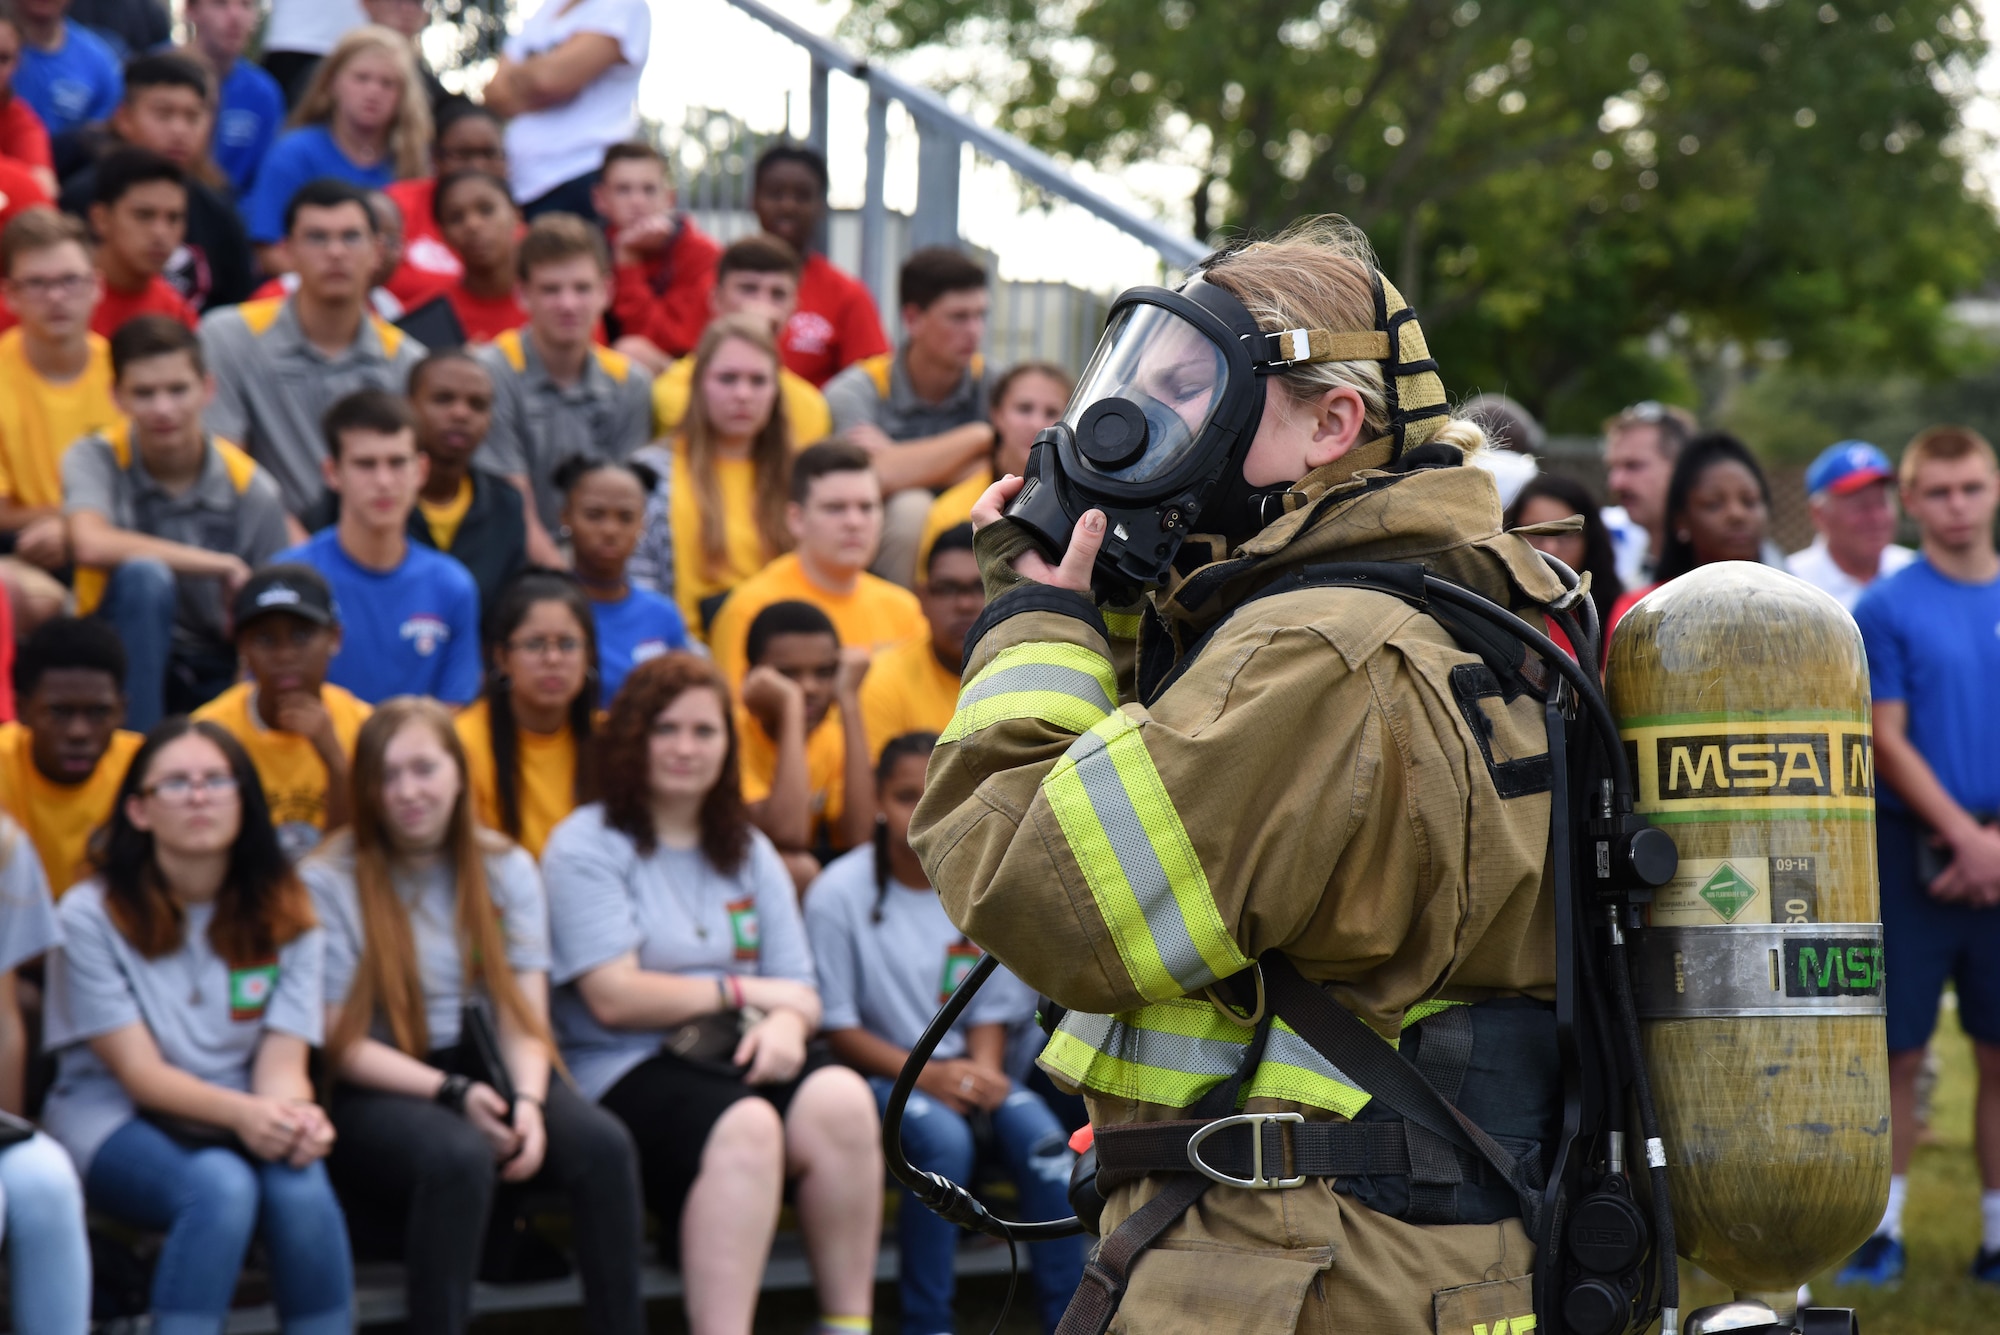 Airman 1st Class Hannah Reichert, 81st Infrastructure Division firefighter, demonstrates how to quickly put on firefighter gear at the Science, Technology, Engineering and Mathematics Diversity Outreach Day Sept. 15, 2017, on Keesler Air Force Base, Mississippi. The event consisted of 10 Mississippi gulf coast high school Junior ROTC units viewing an 81st Security Forces Squadron military working dog demonstration and receiving information about Air Force opportunities and accession requirements with an emphasis on STEM. They also competed in several team building activities. (U.S. Air Force photo by Kemberly Groue)